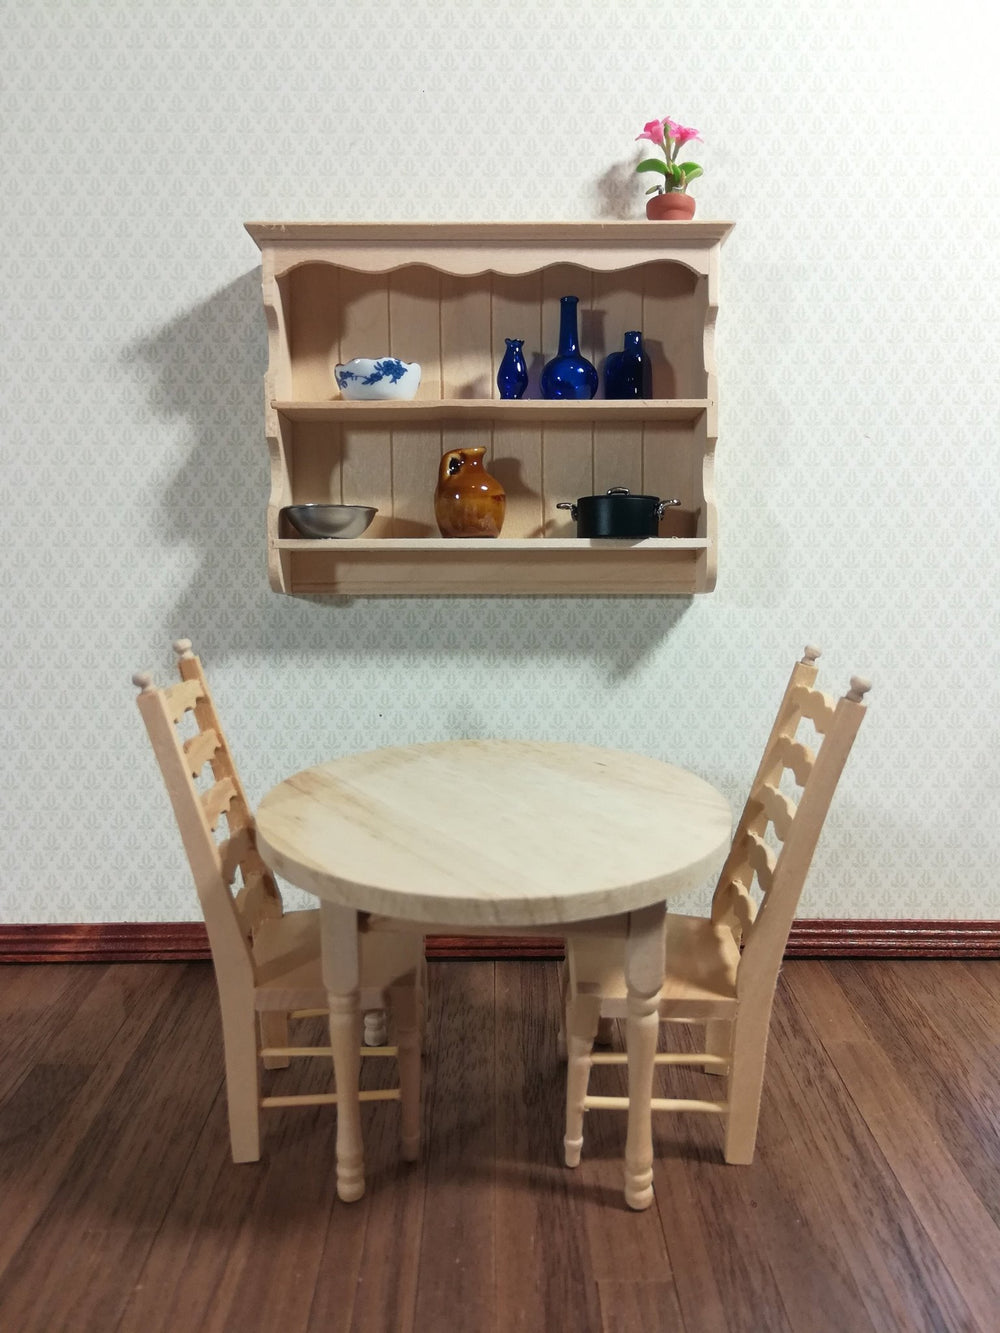 Dollhouse Miniature Kitchen Table Round 1:12 Scale Furniture Unfinished - Miniature Crush